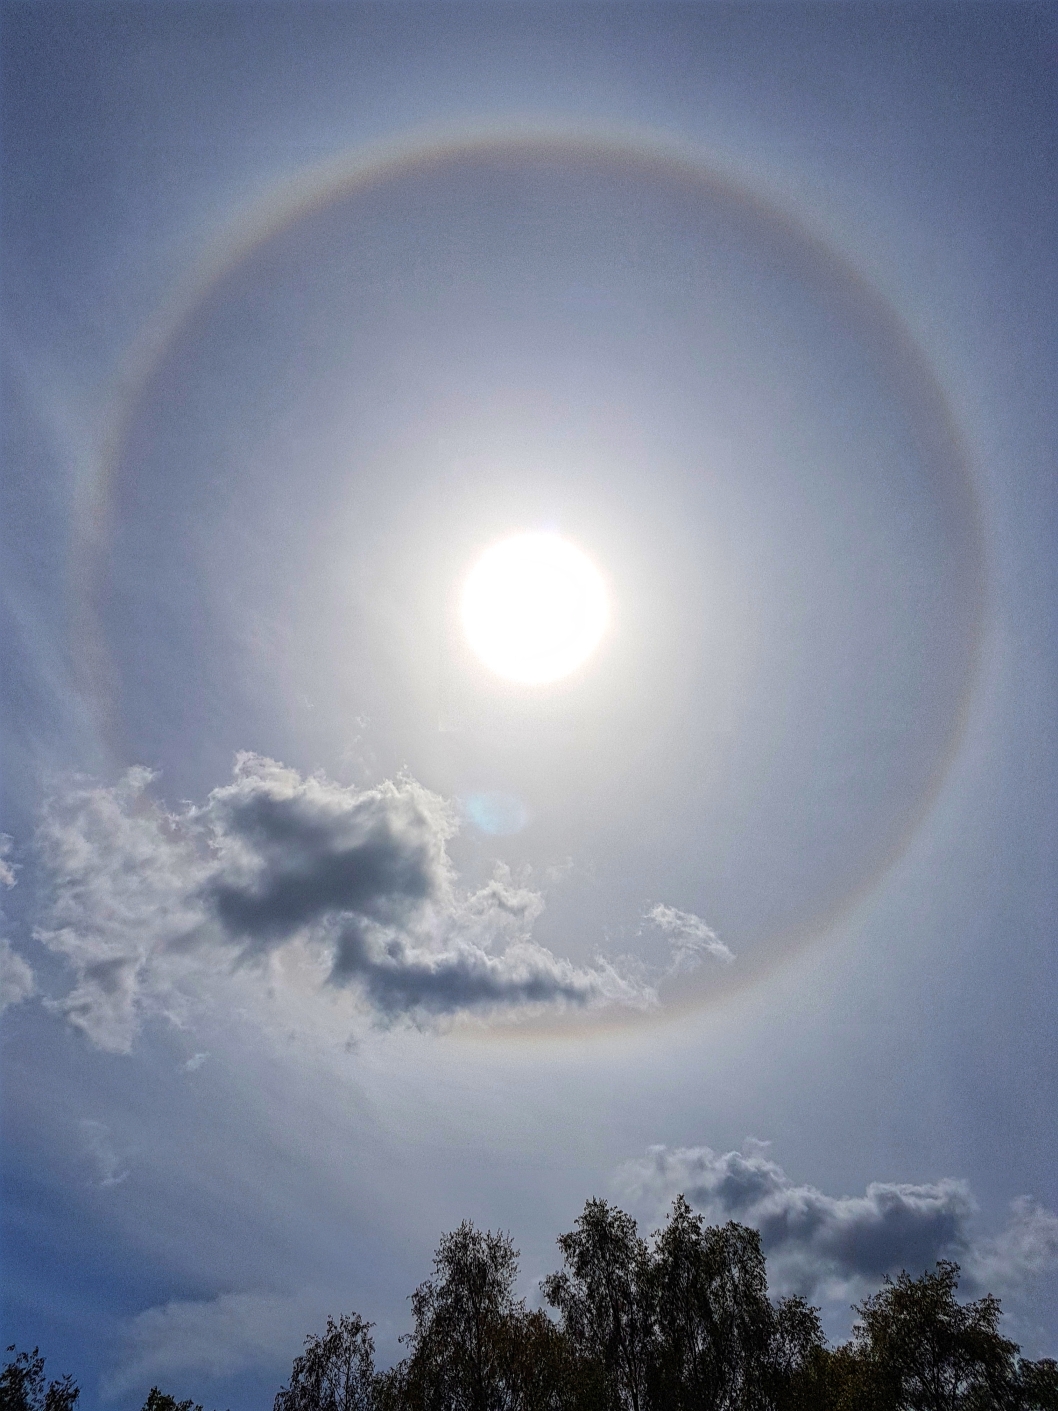 Solar Halo from May 2018 by Bill Samson